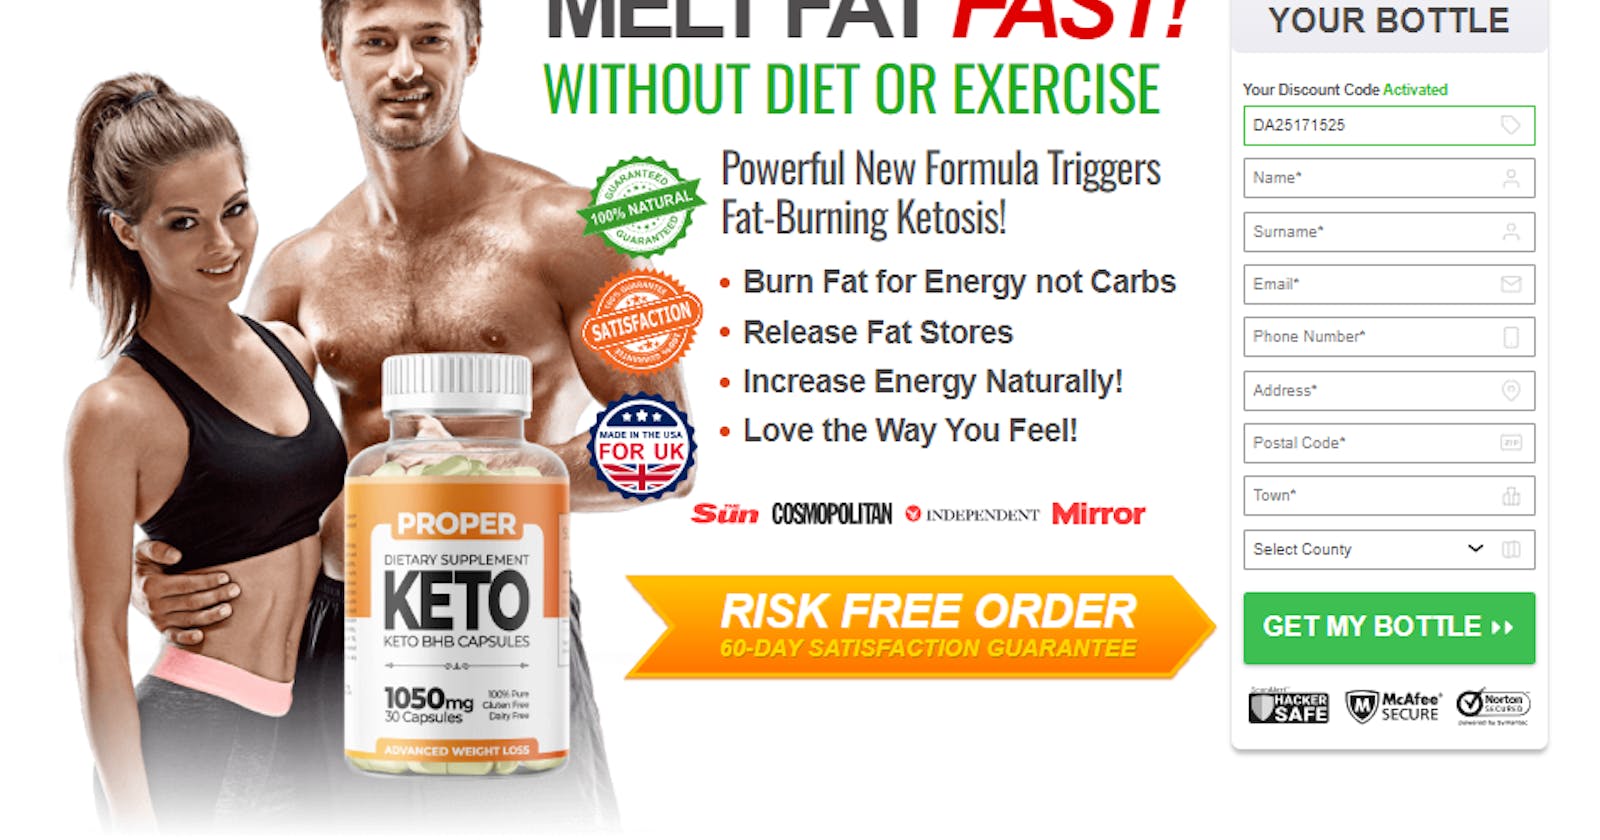 Proper Keto Capsules UK Reviews Price Side impacts and Ingredients, Scam or not!